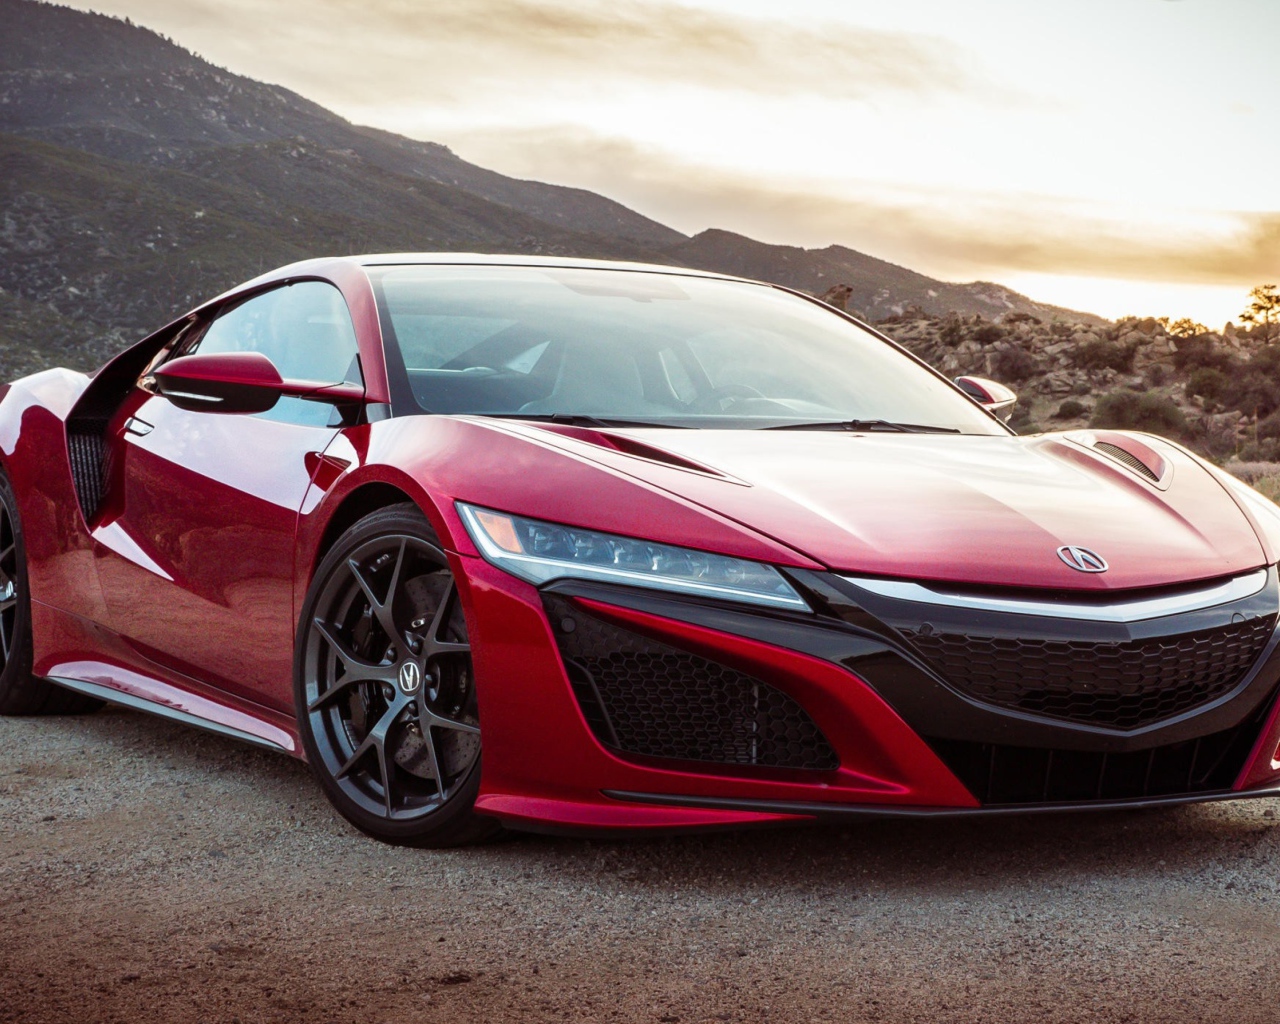 Red car Acura NSX, 2017 amid the mountains